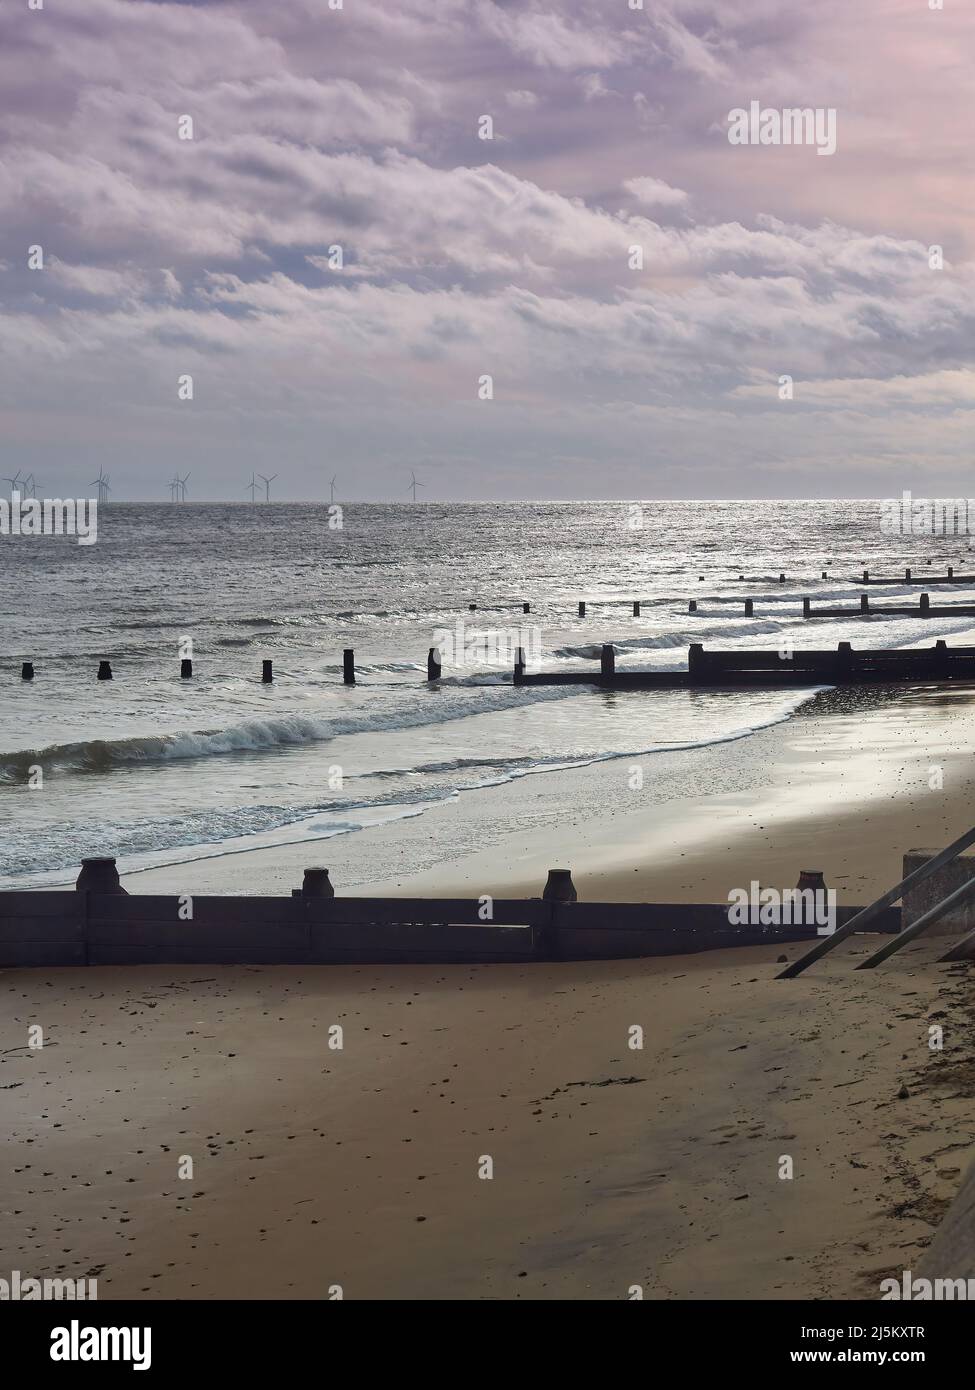 Waves breaking on Frinton Beach, with sunlight breaking through storm clouds overhead to reflect in soft, glowing light from the shimmering sand. Stock Photo